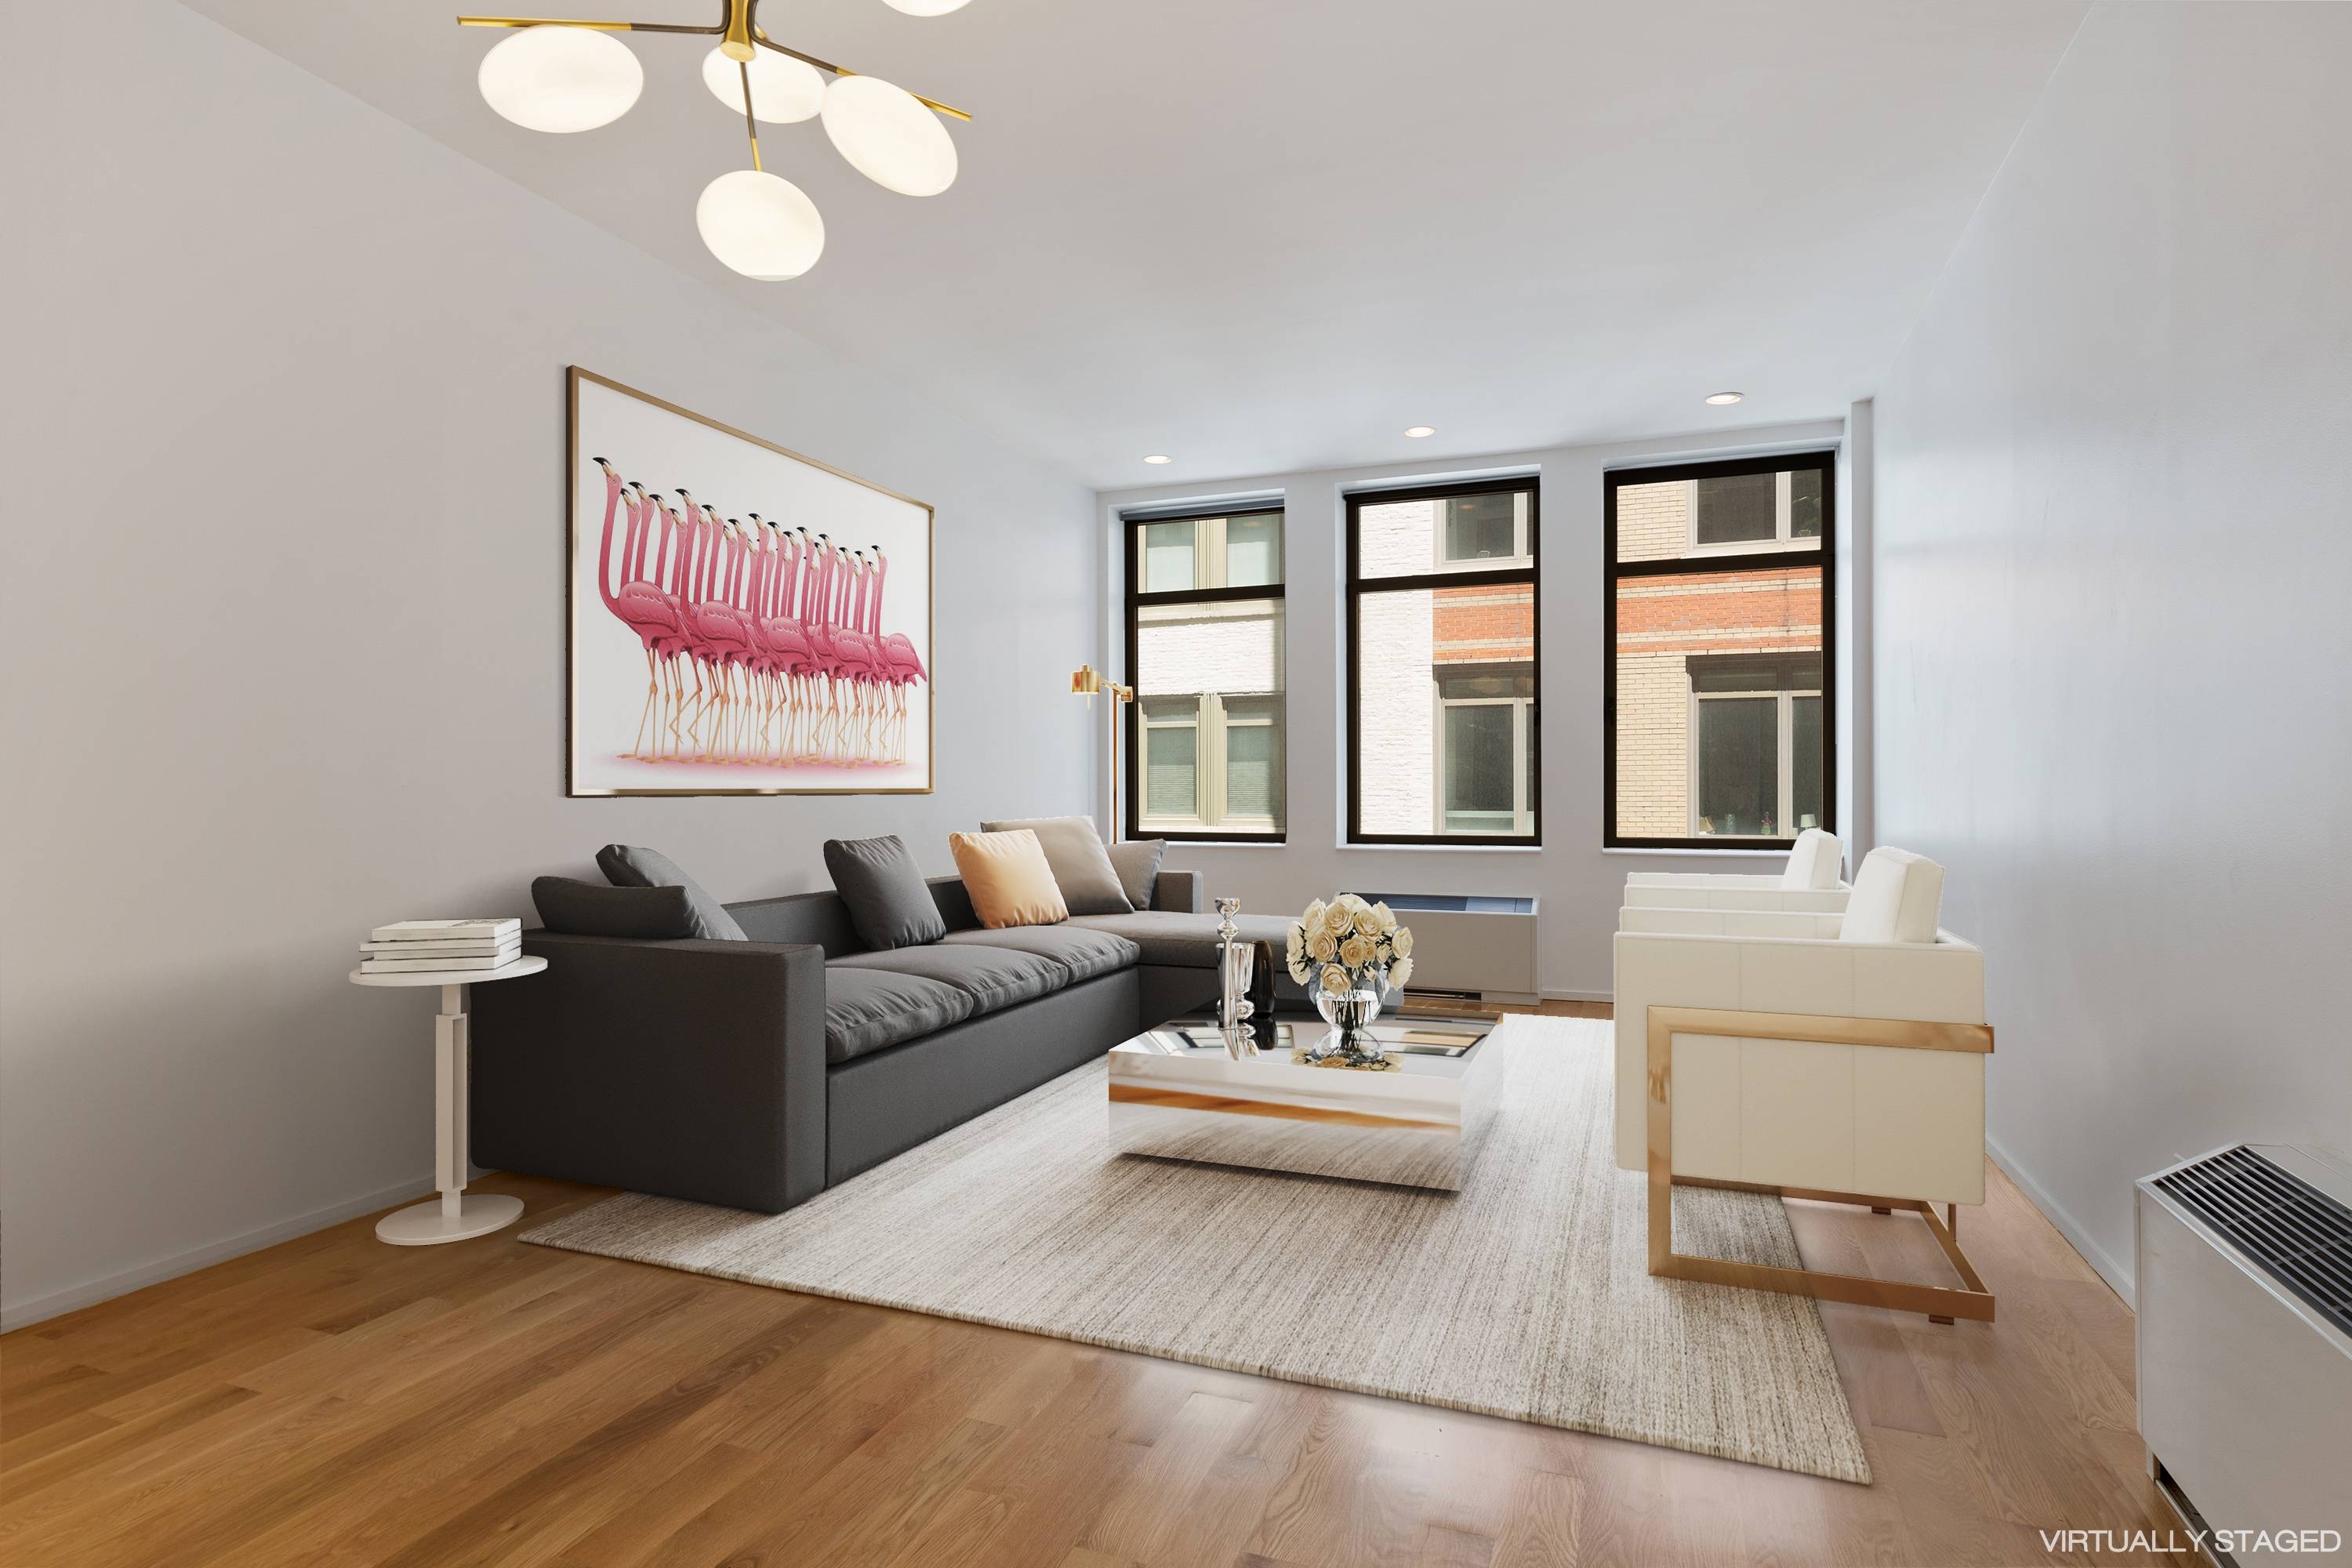 Spectacularly renovated ultra luxurious huge loft like one bedroom home at The Chelsea Mercantile, 252 Seventh Ave 8S.